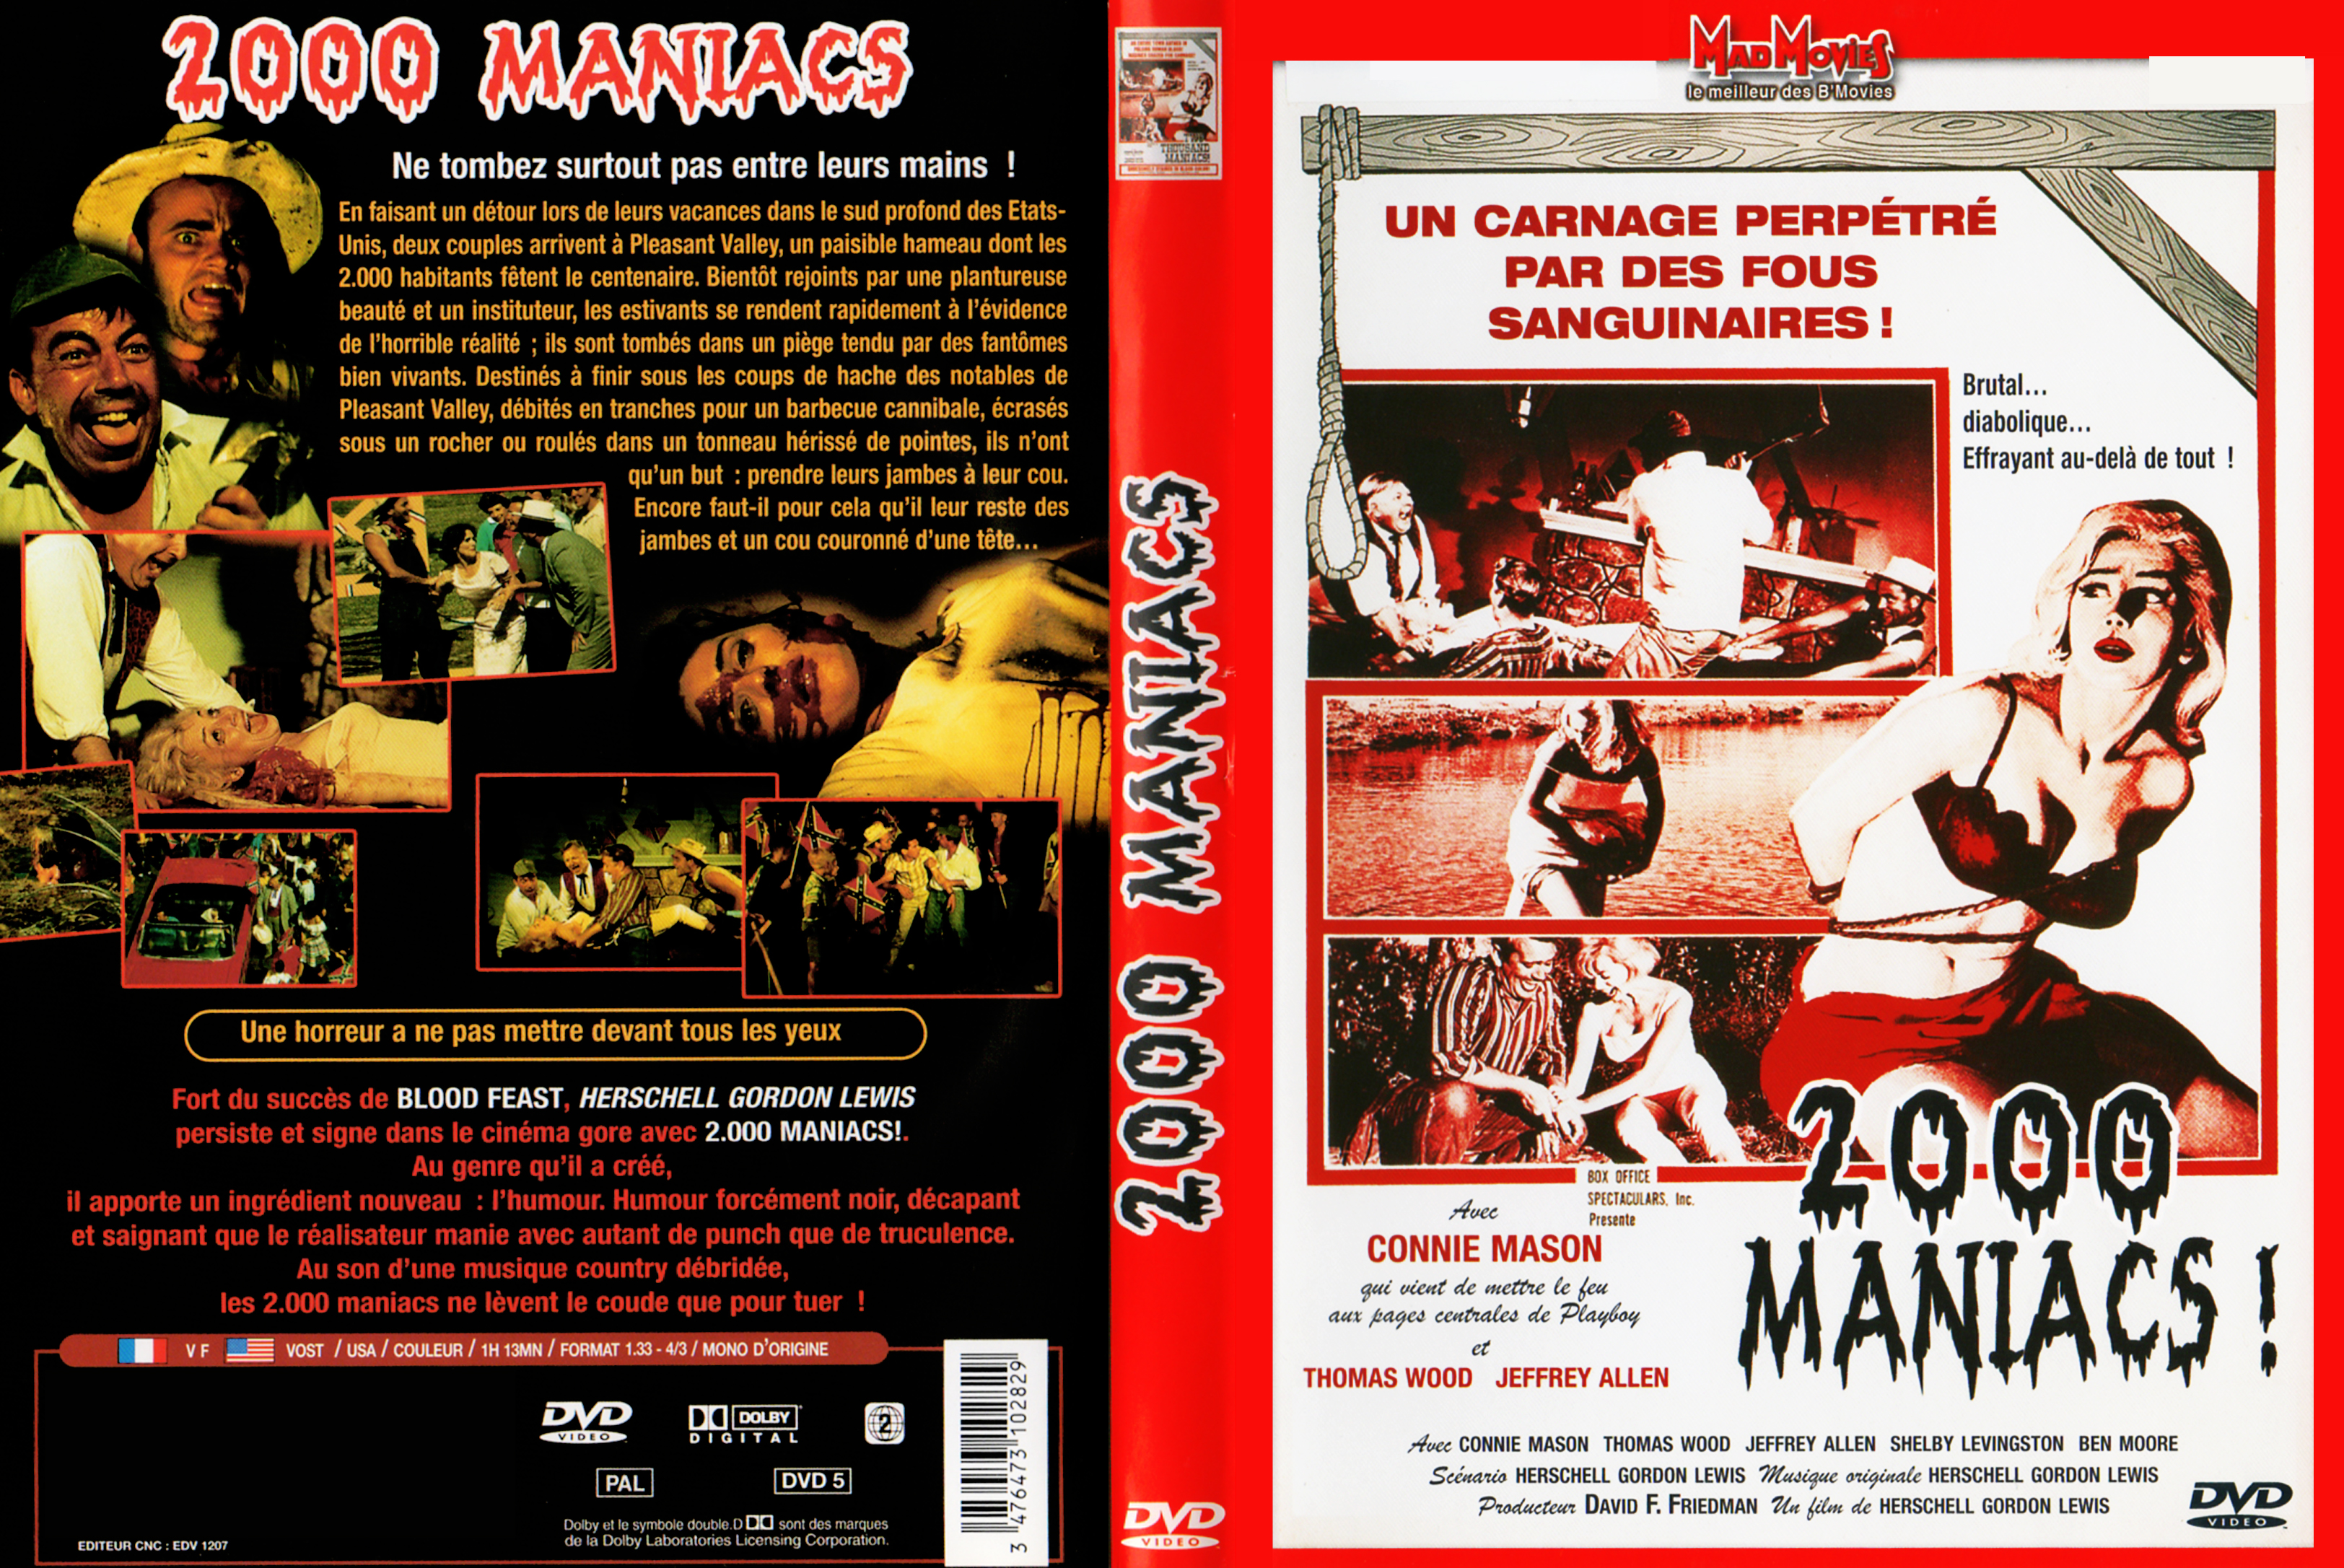 Jaquette DVD 2000 maniacs